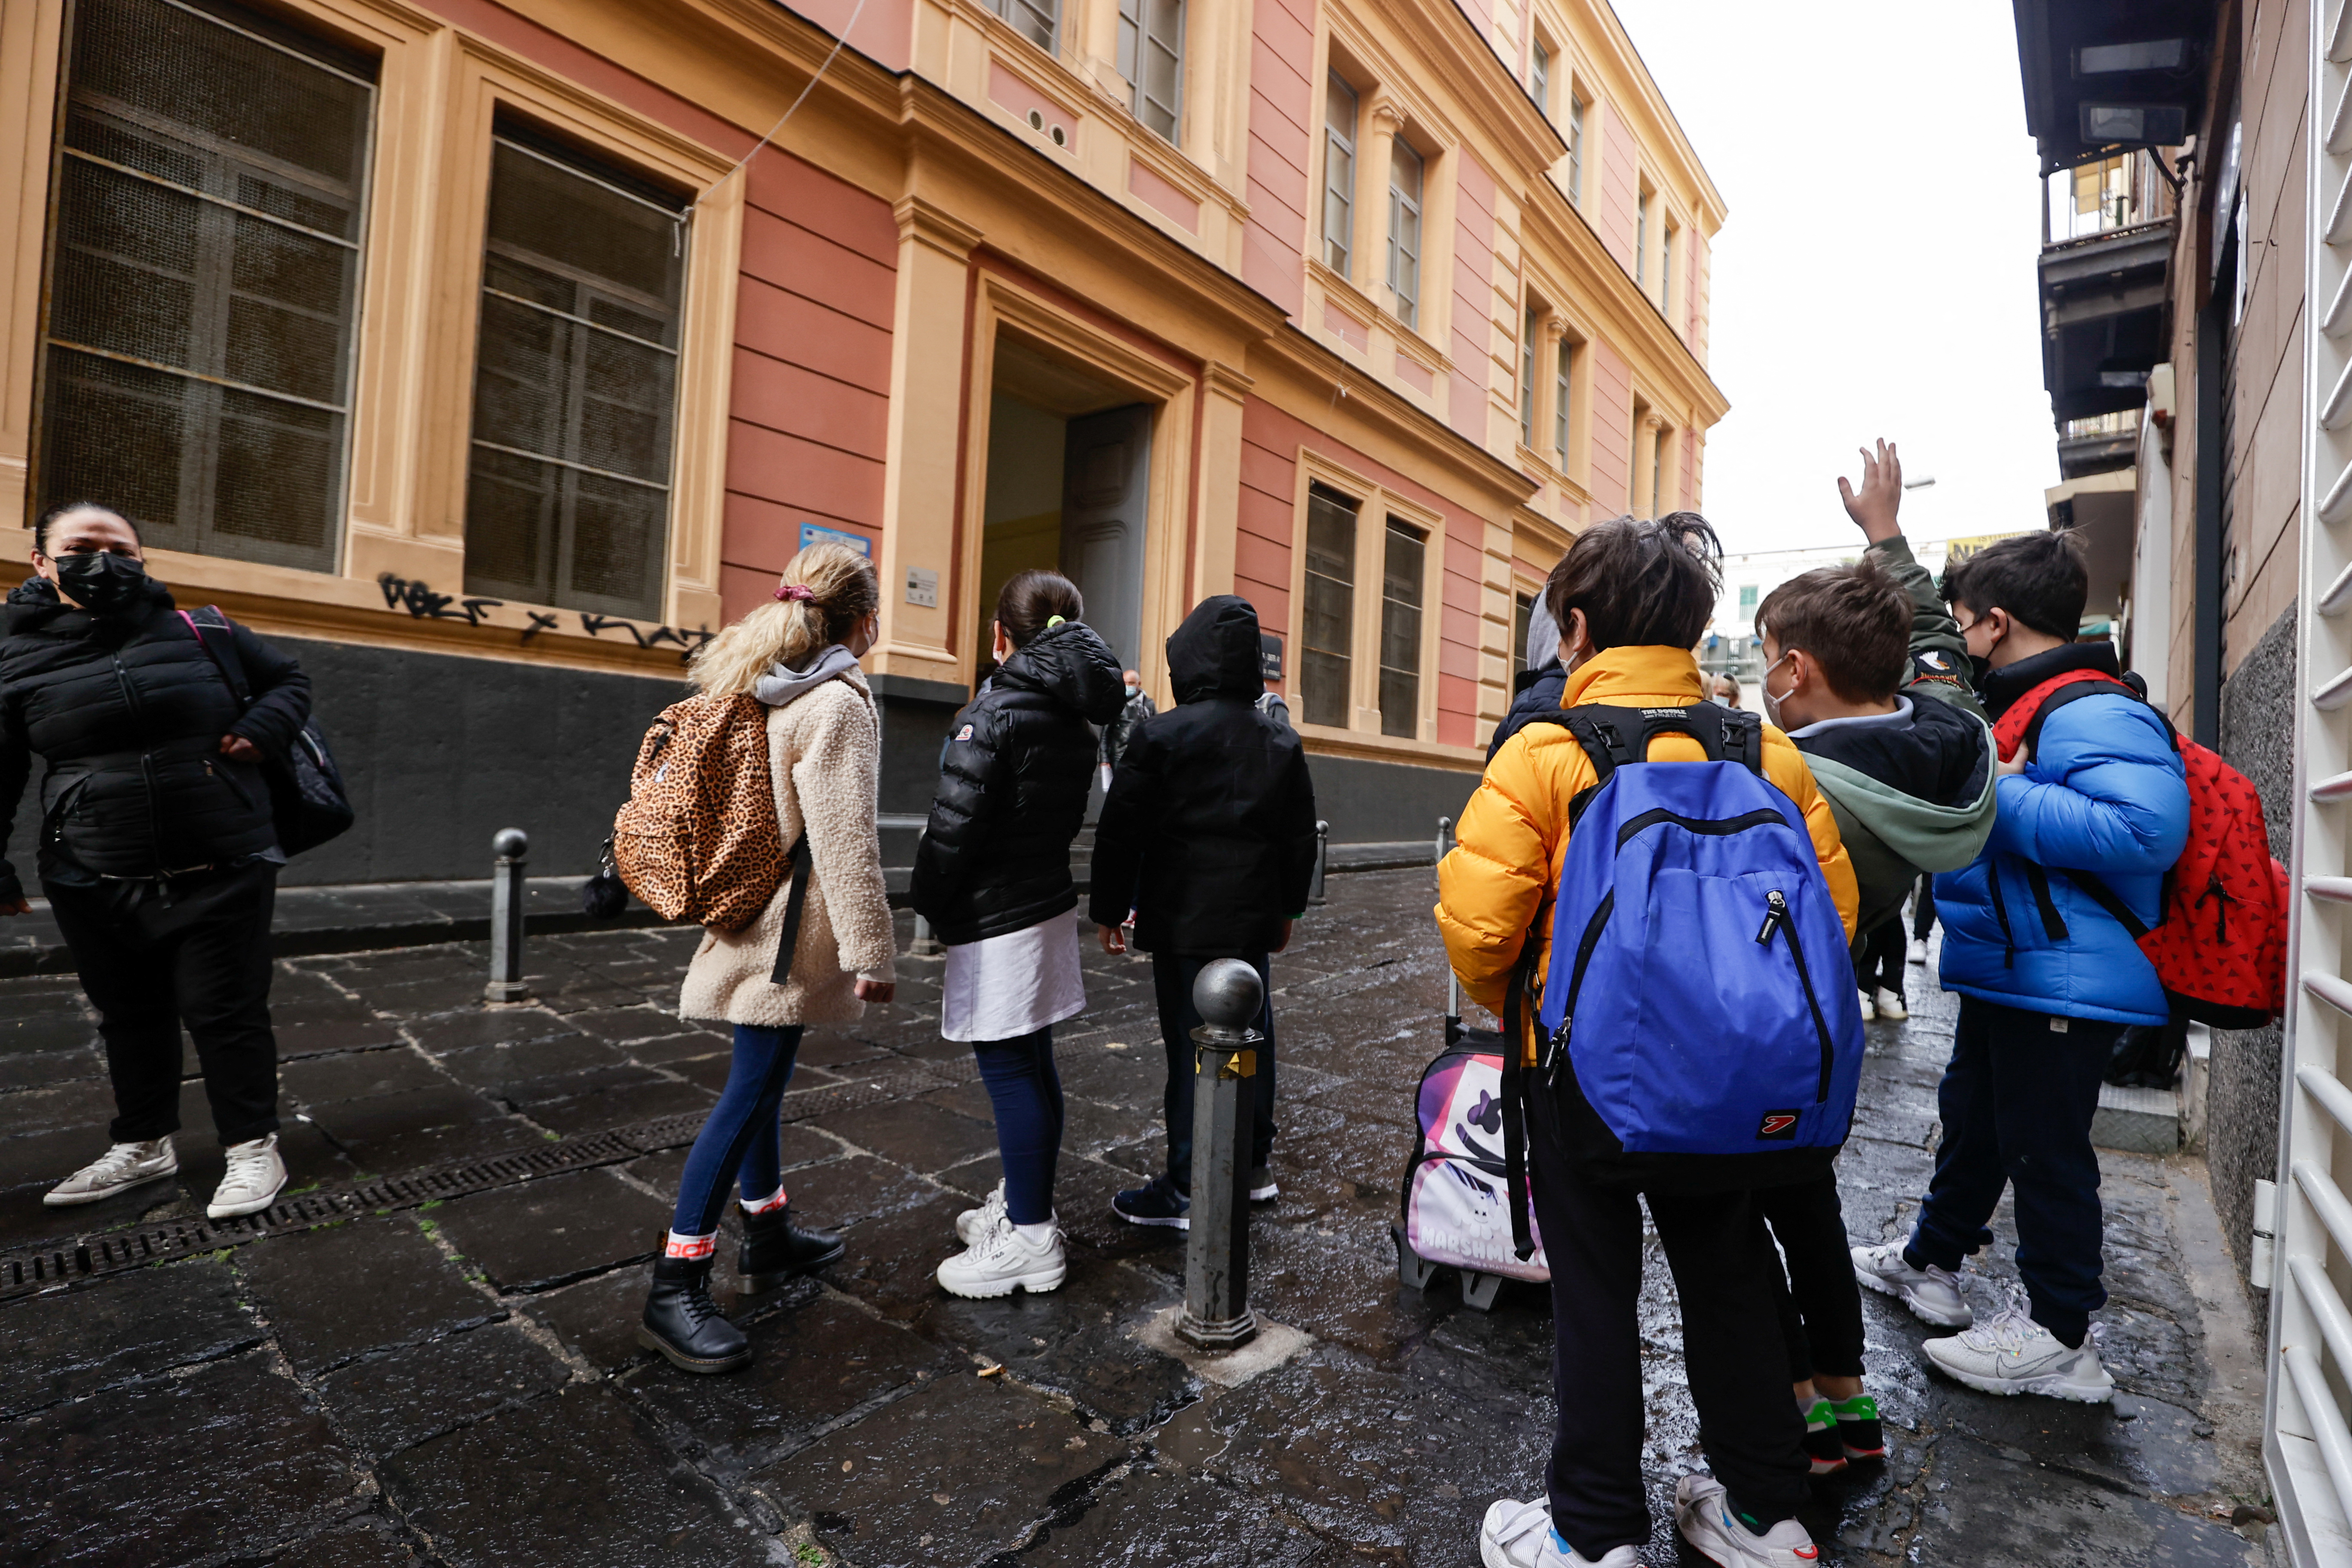 Children stand outside a school as the town is downgraded from a red to an orange zone, after weeks of tight restrictions to fight the coronavirus disease (COVID-19) outbreak, in Naples, Italy, April 19, 2021. REUTERS/Ciro de Luca